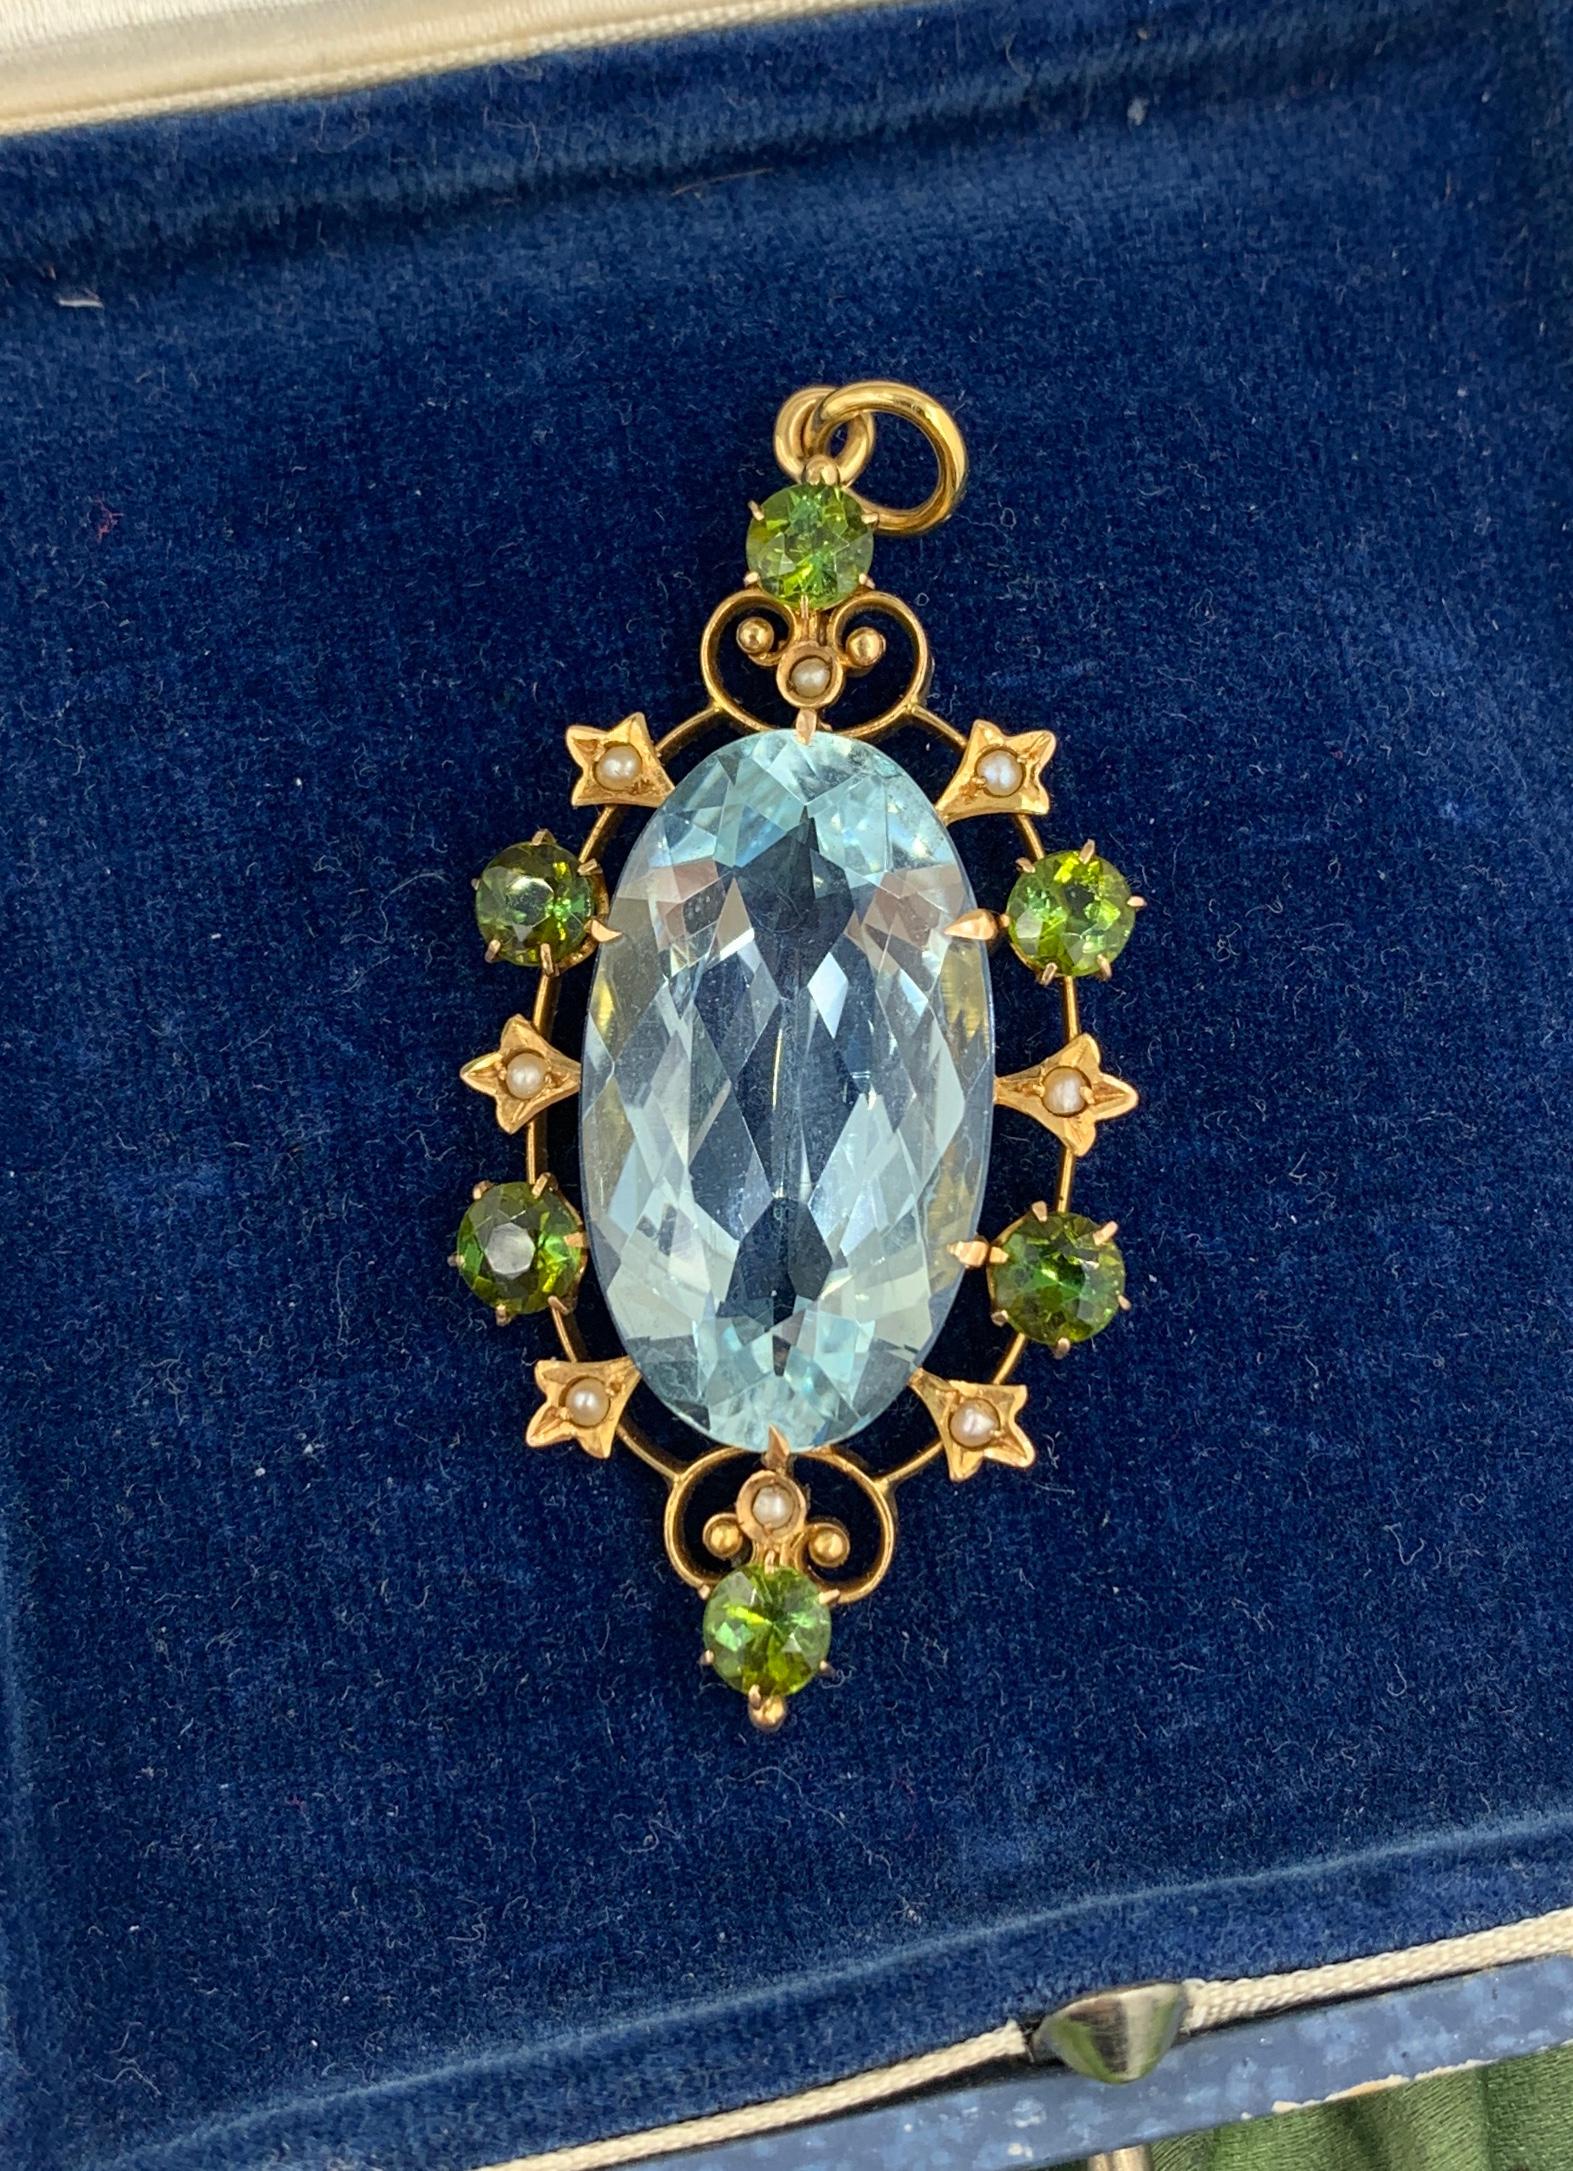 15 Carat Aquamarine Green Tourmaline Pendant Necklace Art Deco 14 Karat Gold In Excellent Condition For Sale In New York, NY